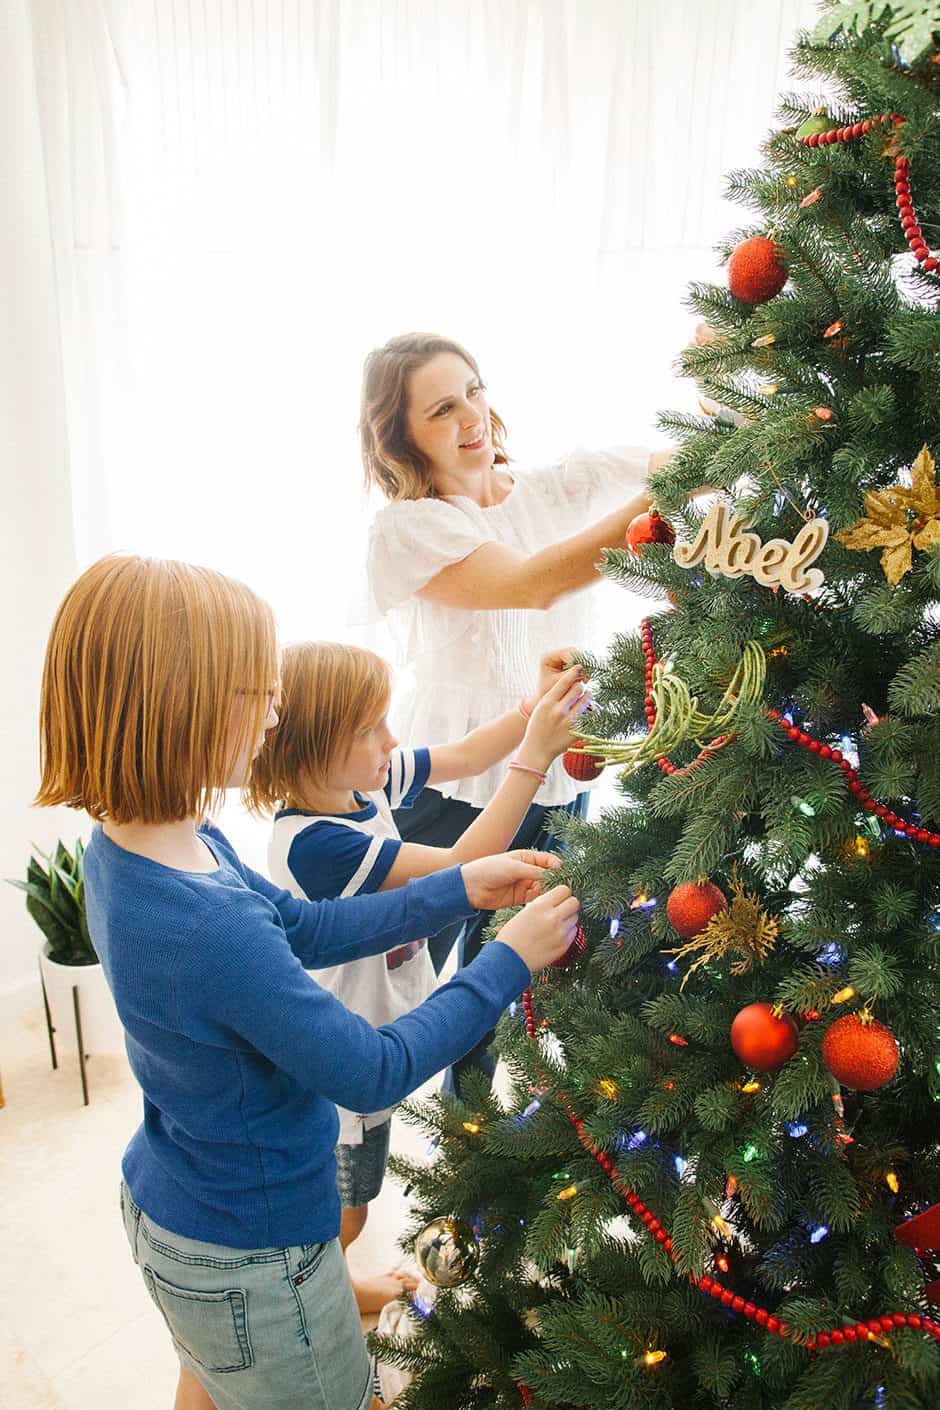 The holiday season is notoriously stressful and busy, but it doesn't have to be that way! Learn how to keep the magic alive and enjoy the season with your kids without having an anxiety attack. Read on for tips for a stress free Christmas! 